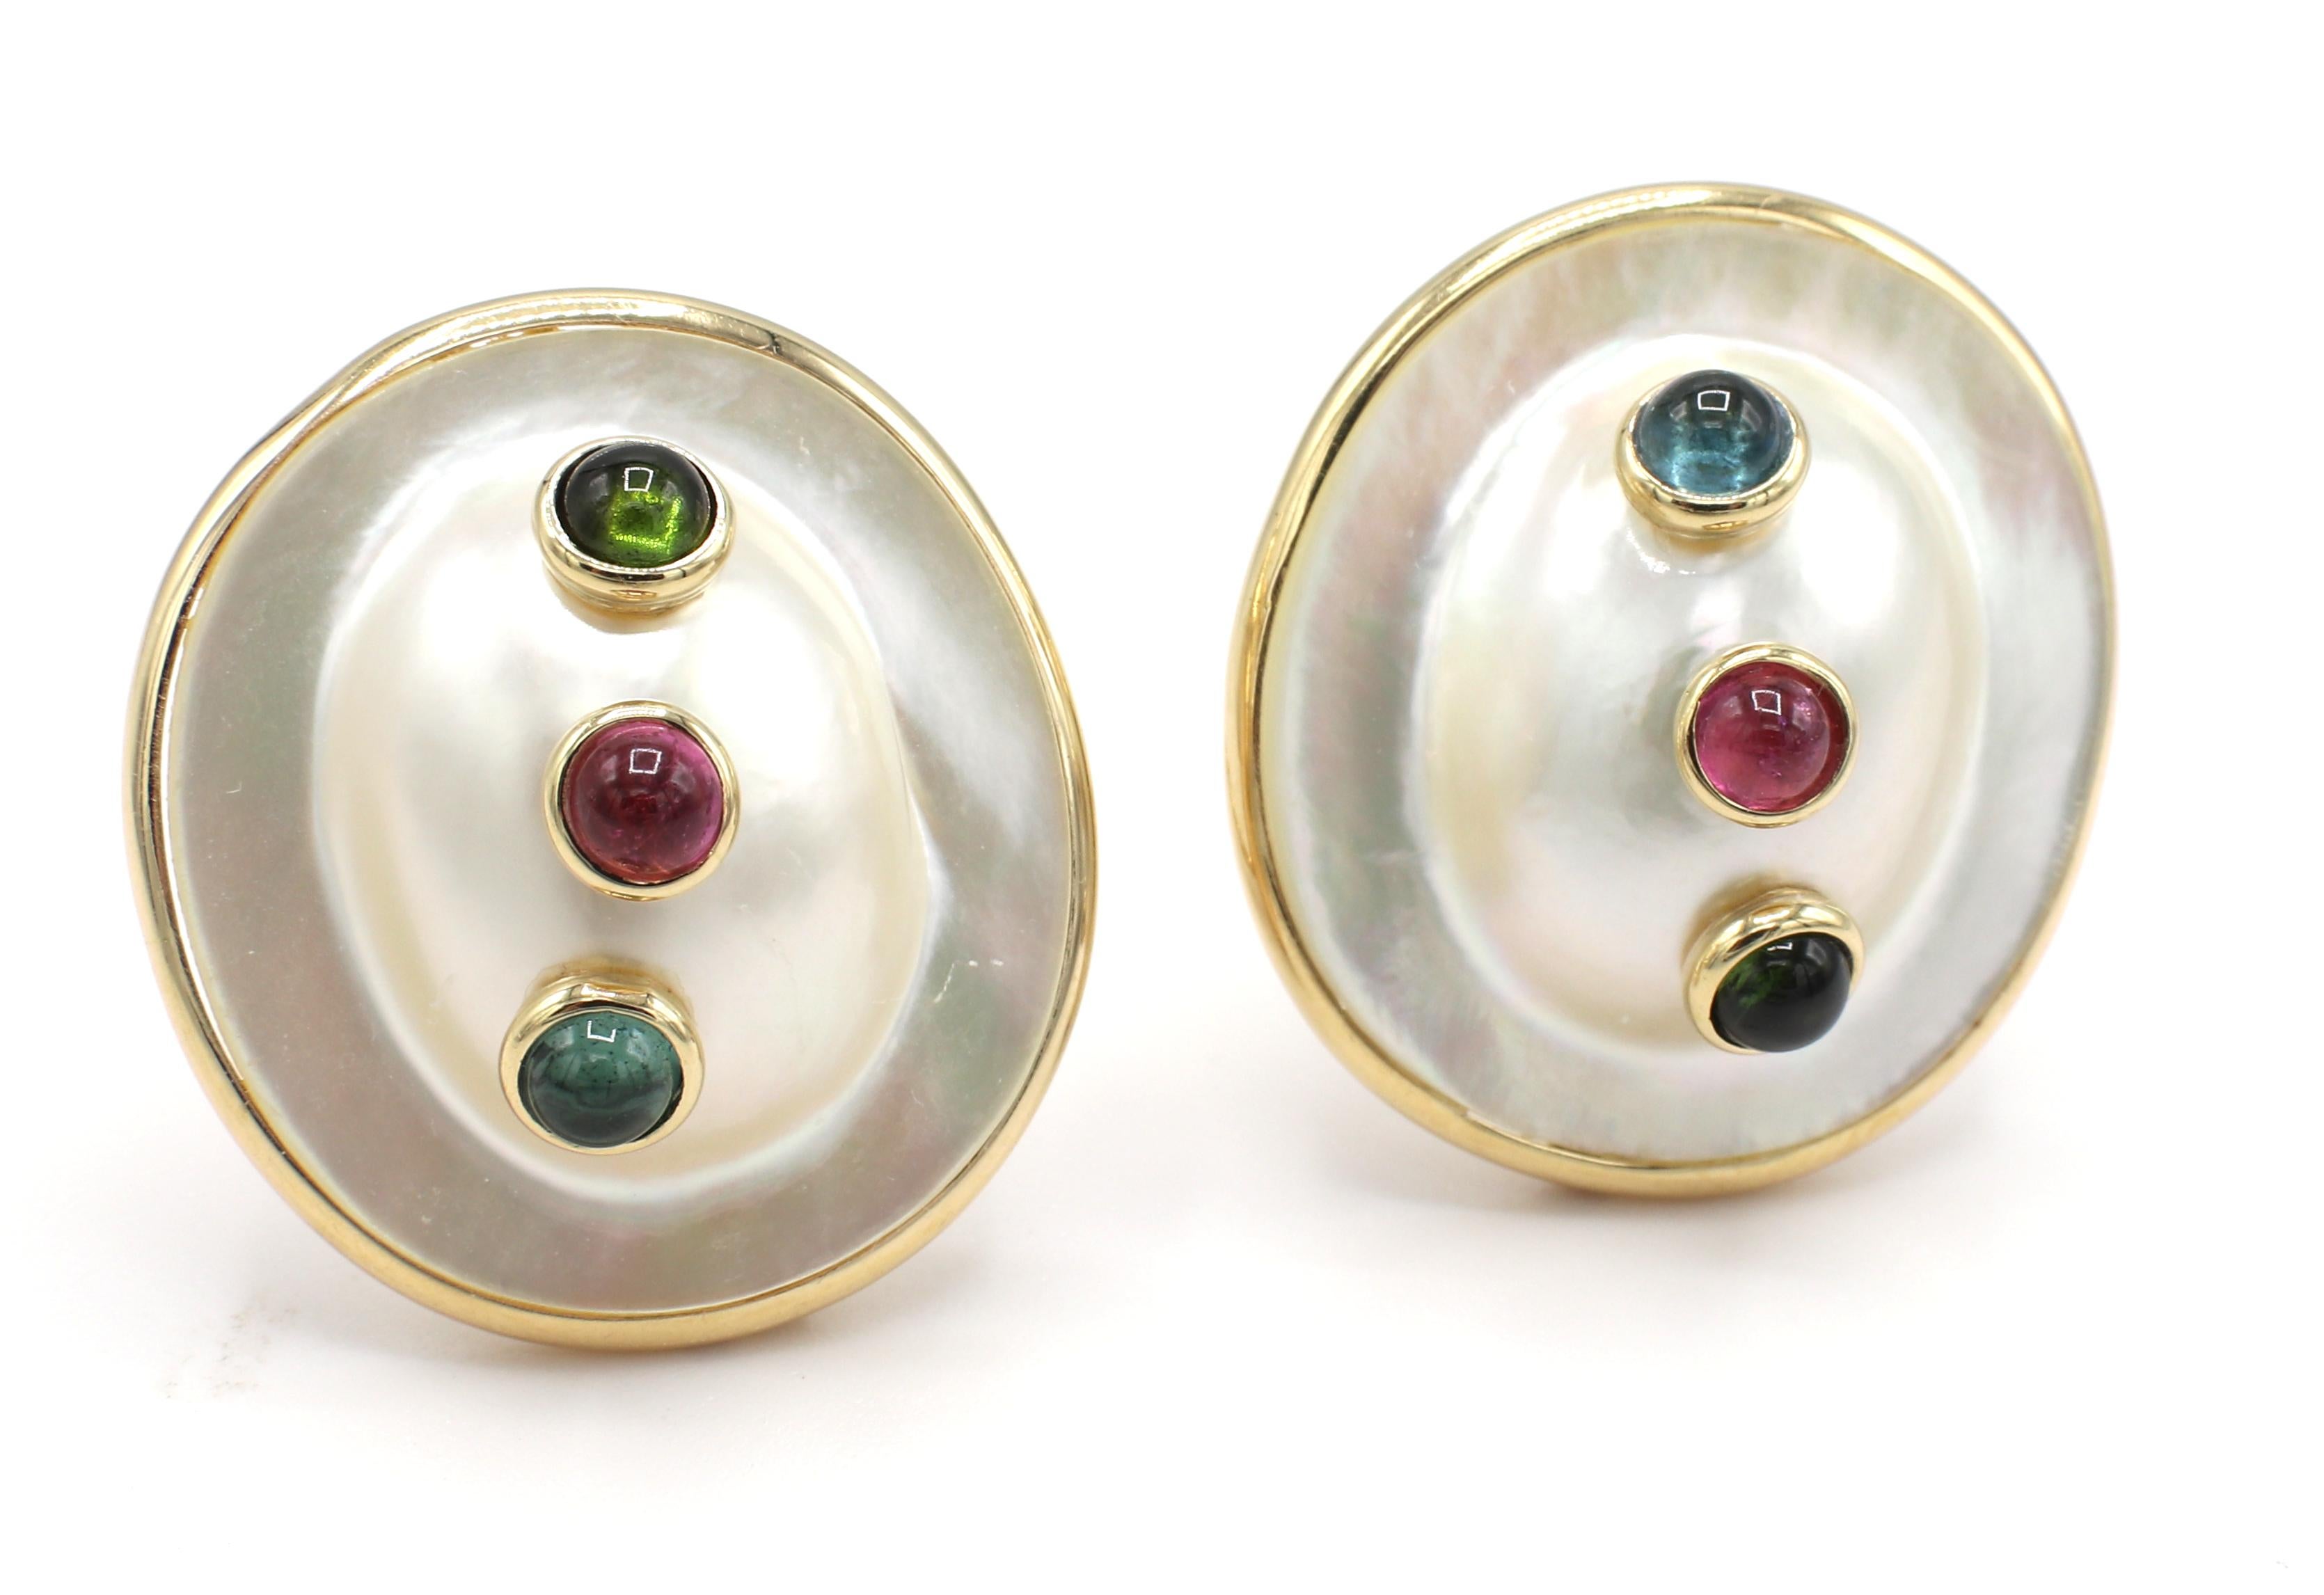 Mabe Pearl & Tourmaline 14 Karat Yellow Gold Clip Earrings 
Metal: 14k yellow gold
Weight: 14.88 grams
Length: 28mm 
Width: 25mm
Backs: Lever backs with optional post